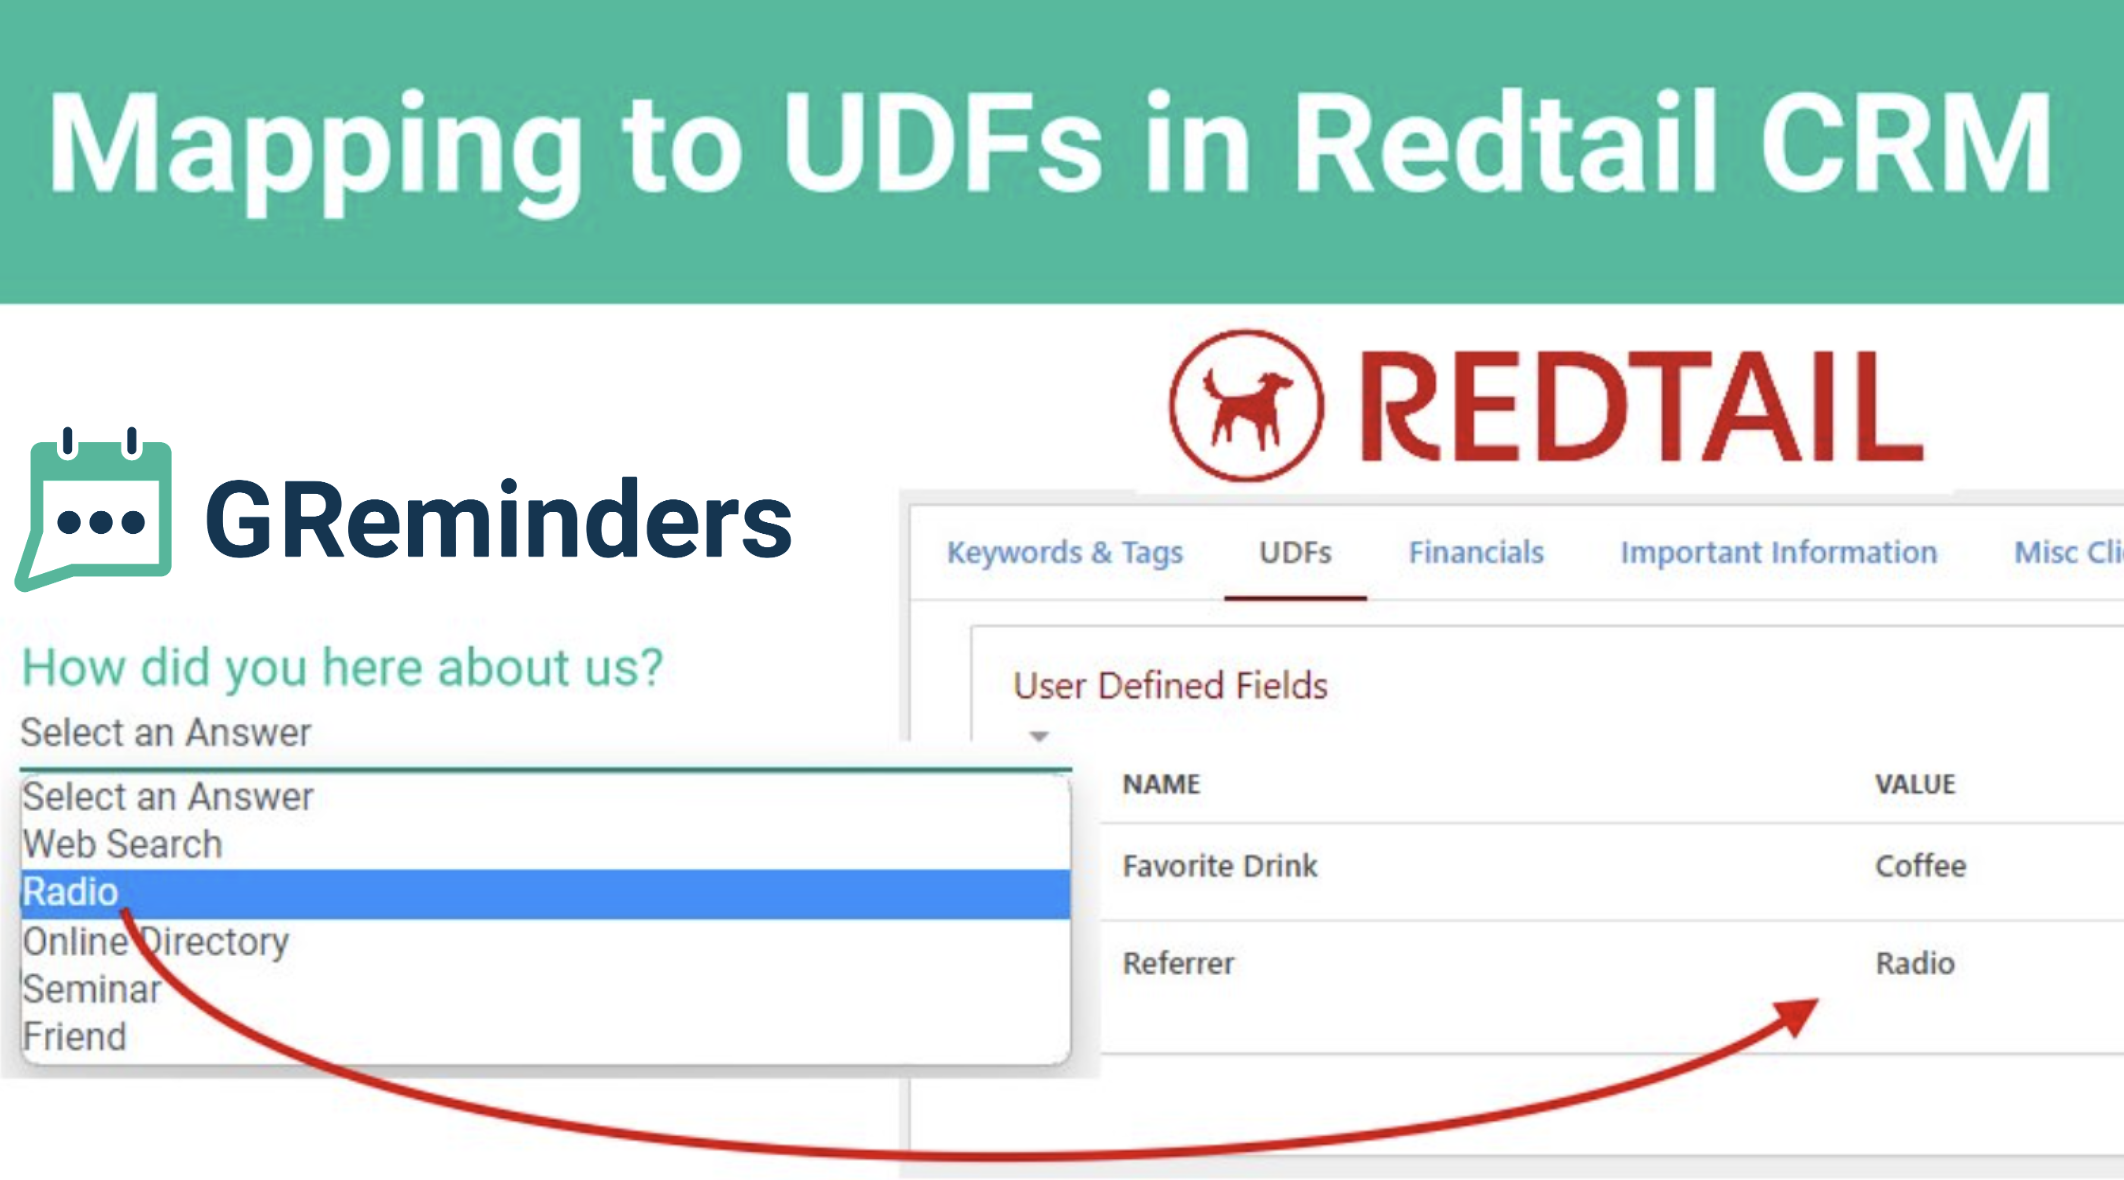 Mapping to User Defined Fields in Redtail